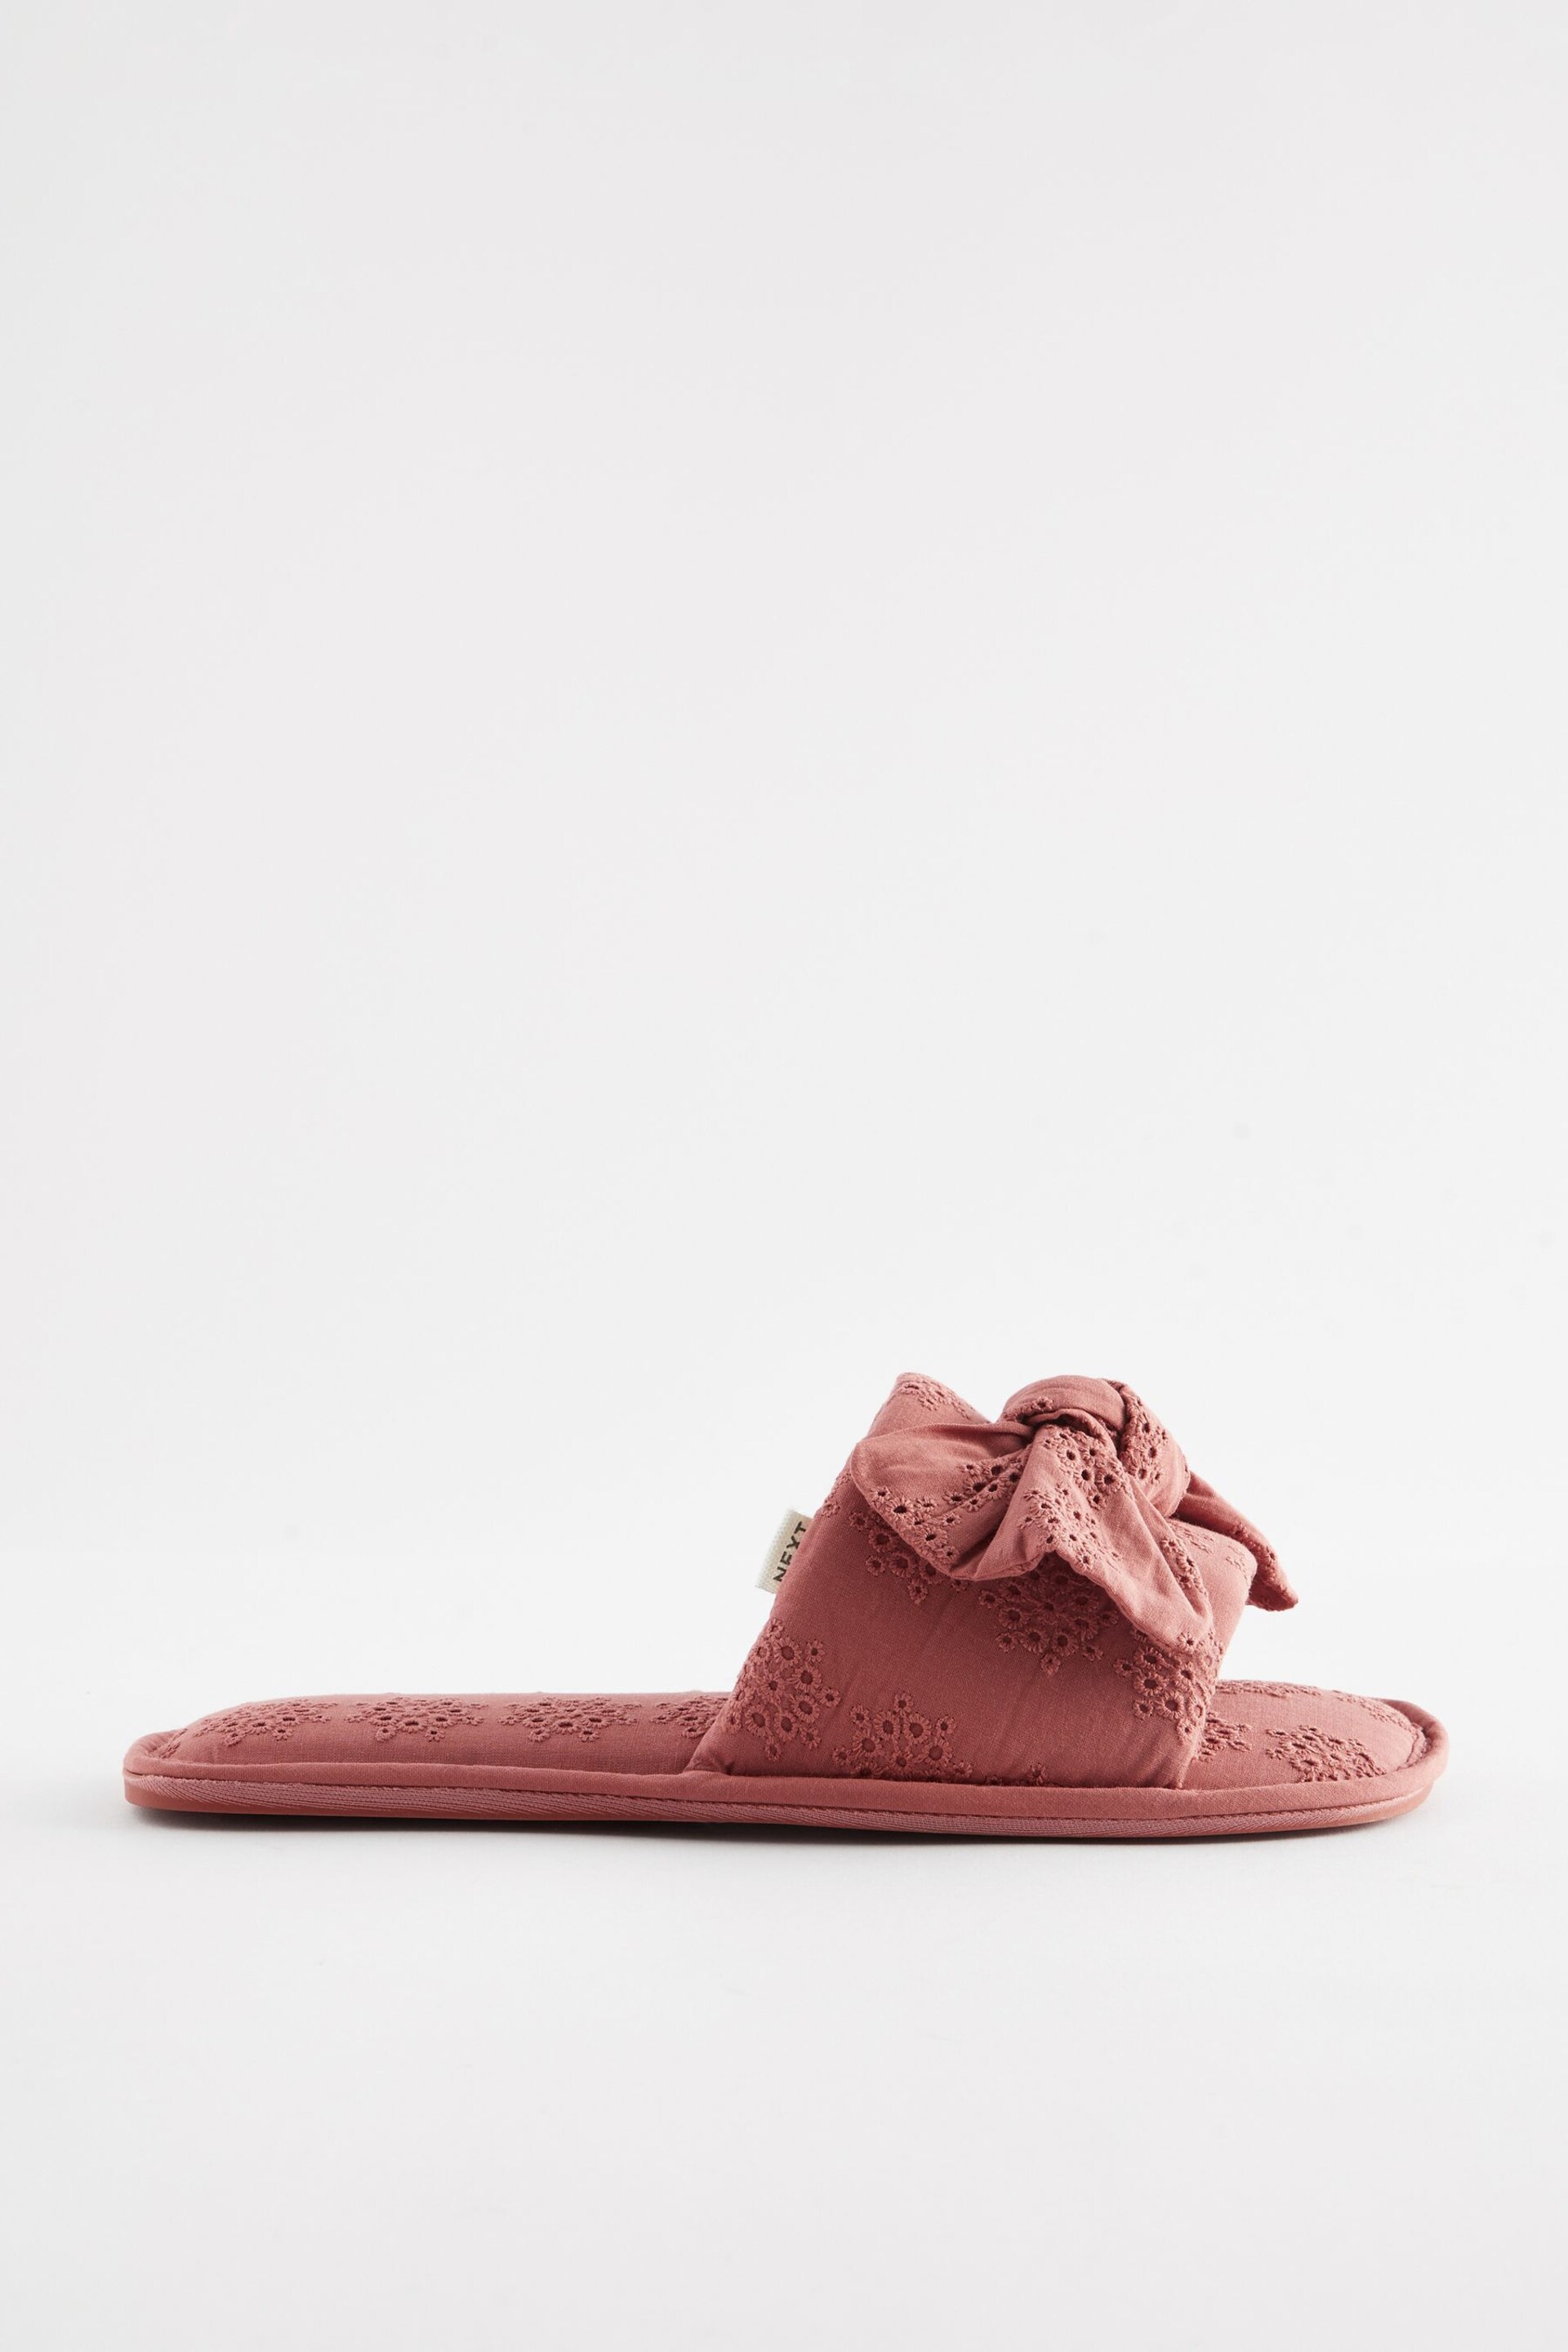 Pink Broderie Bow Slider Slippers - Image 4 of 7